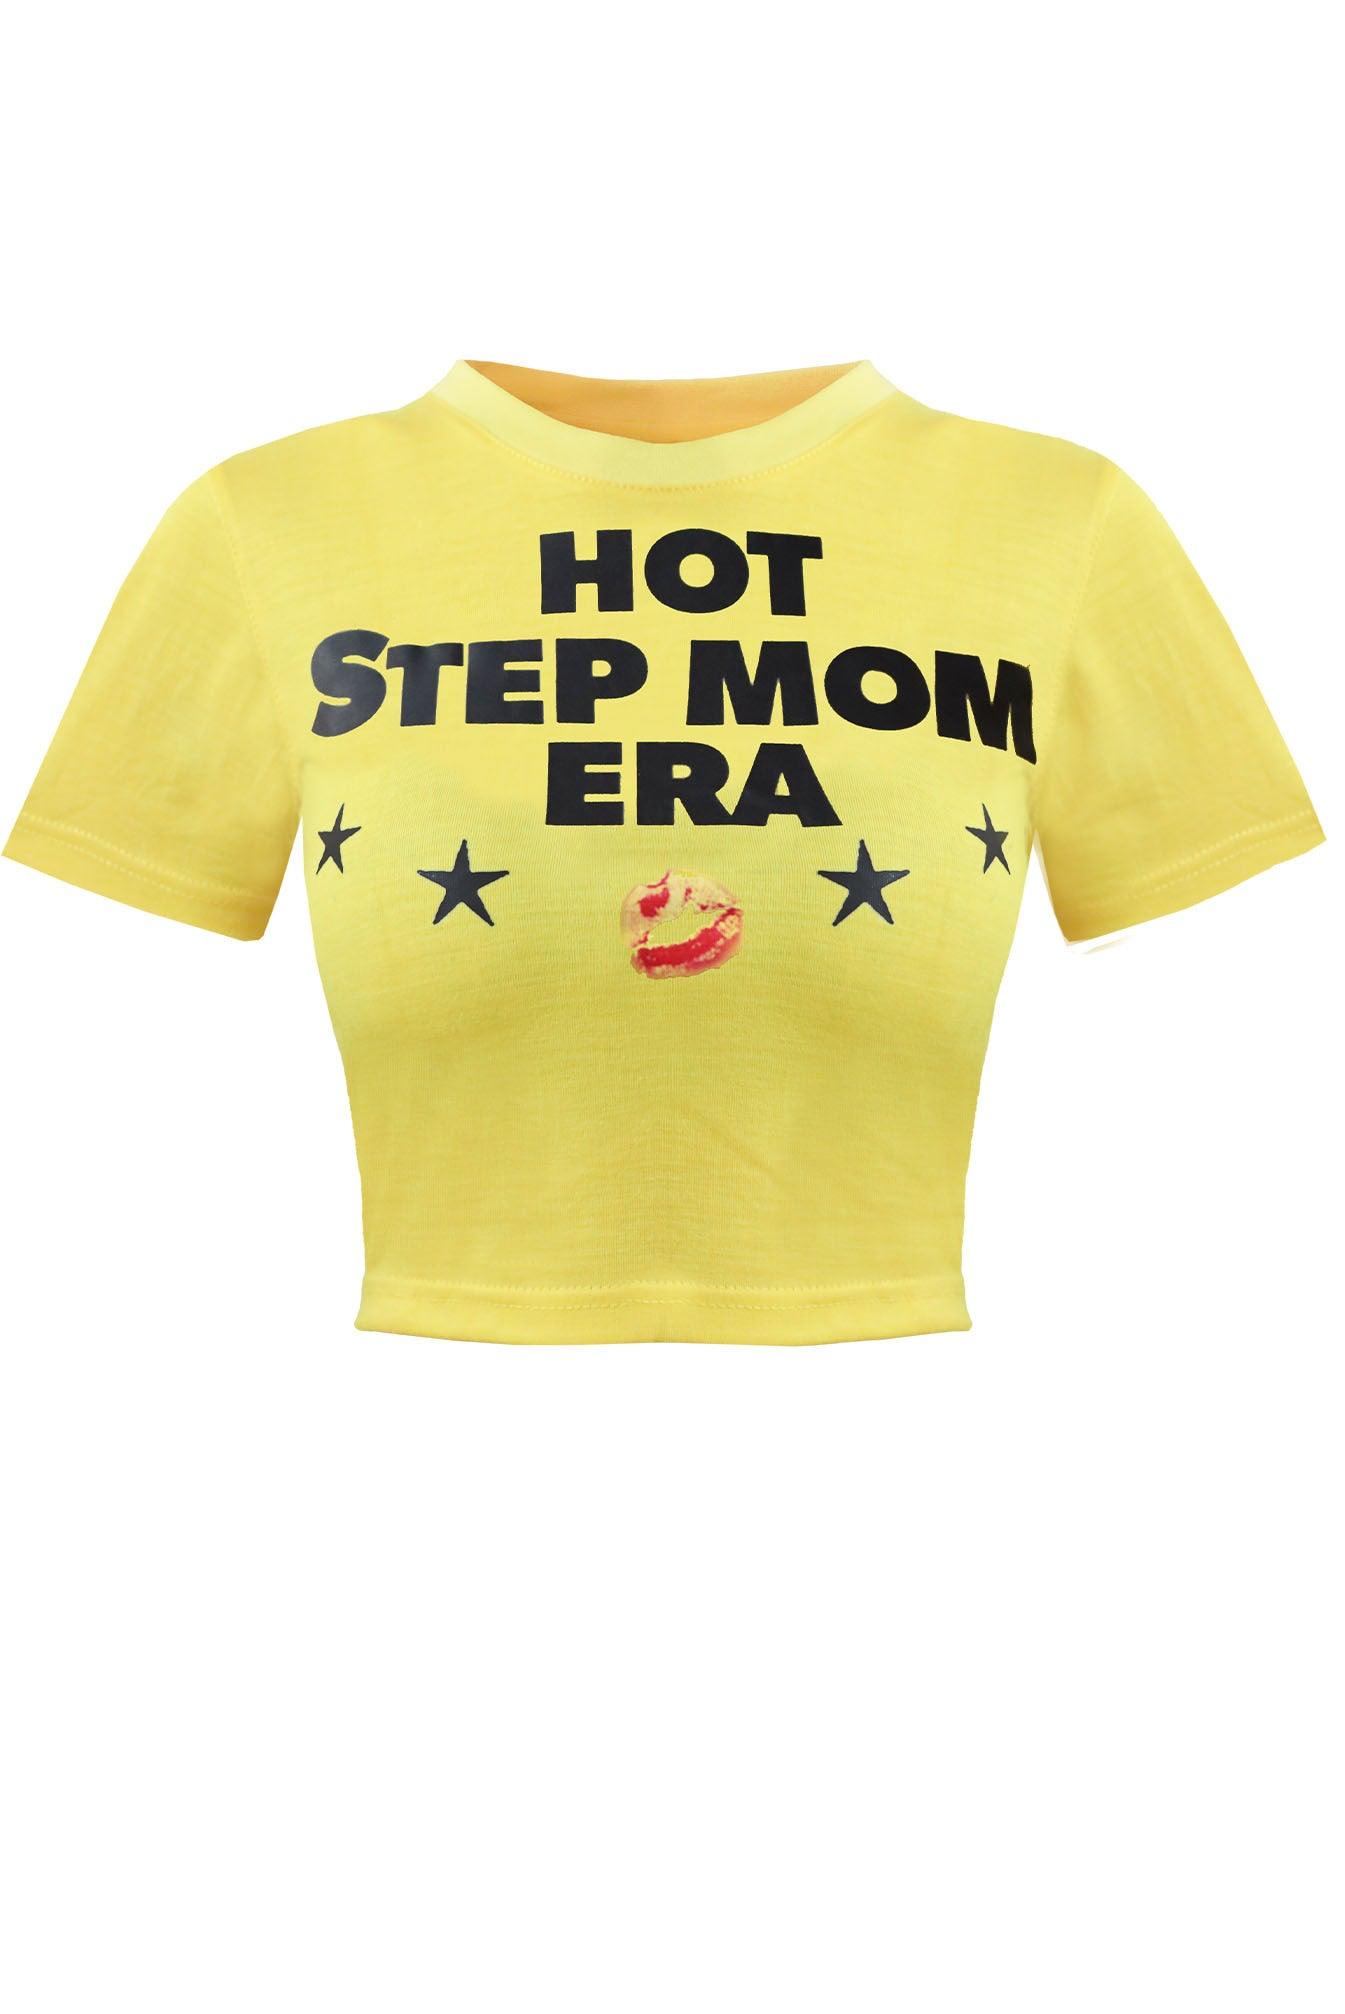 cut out of y2k Hot Step Mom - Mum era graphic printed vintage retro inspired yellow cropped fitted baby tee t-shirt